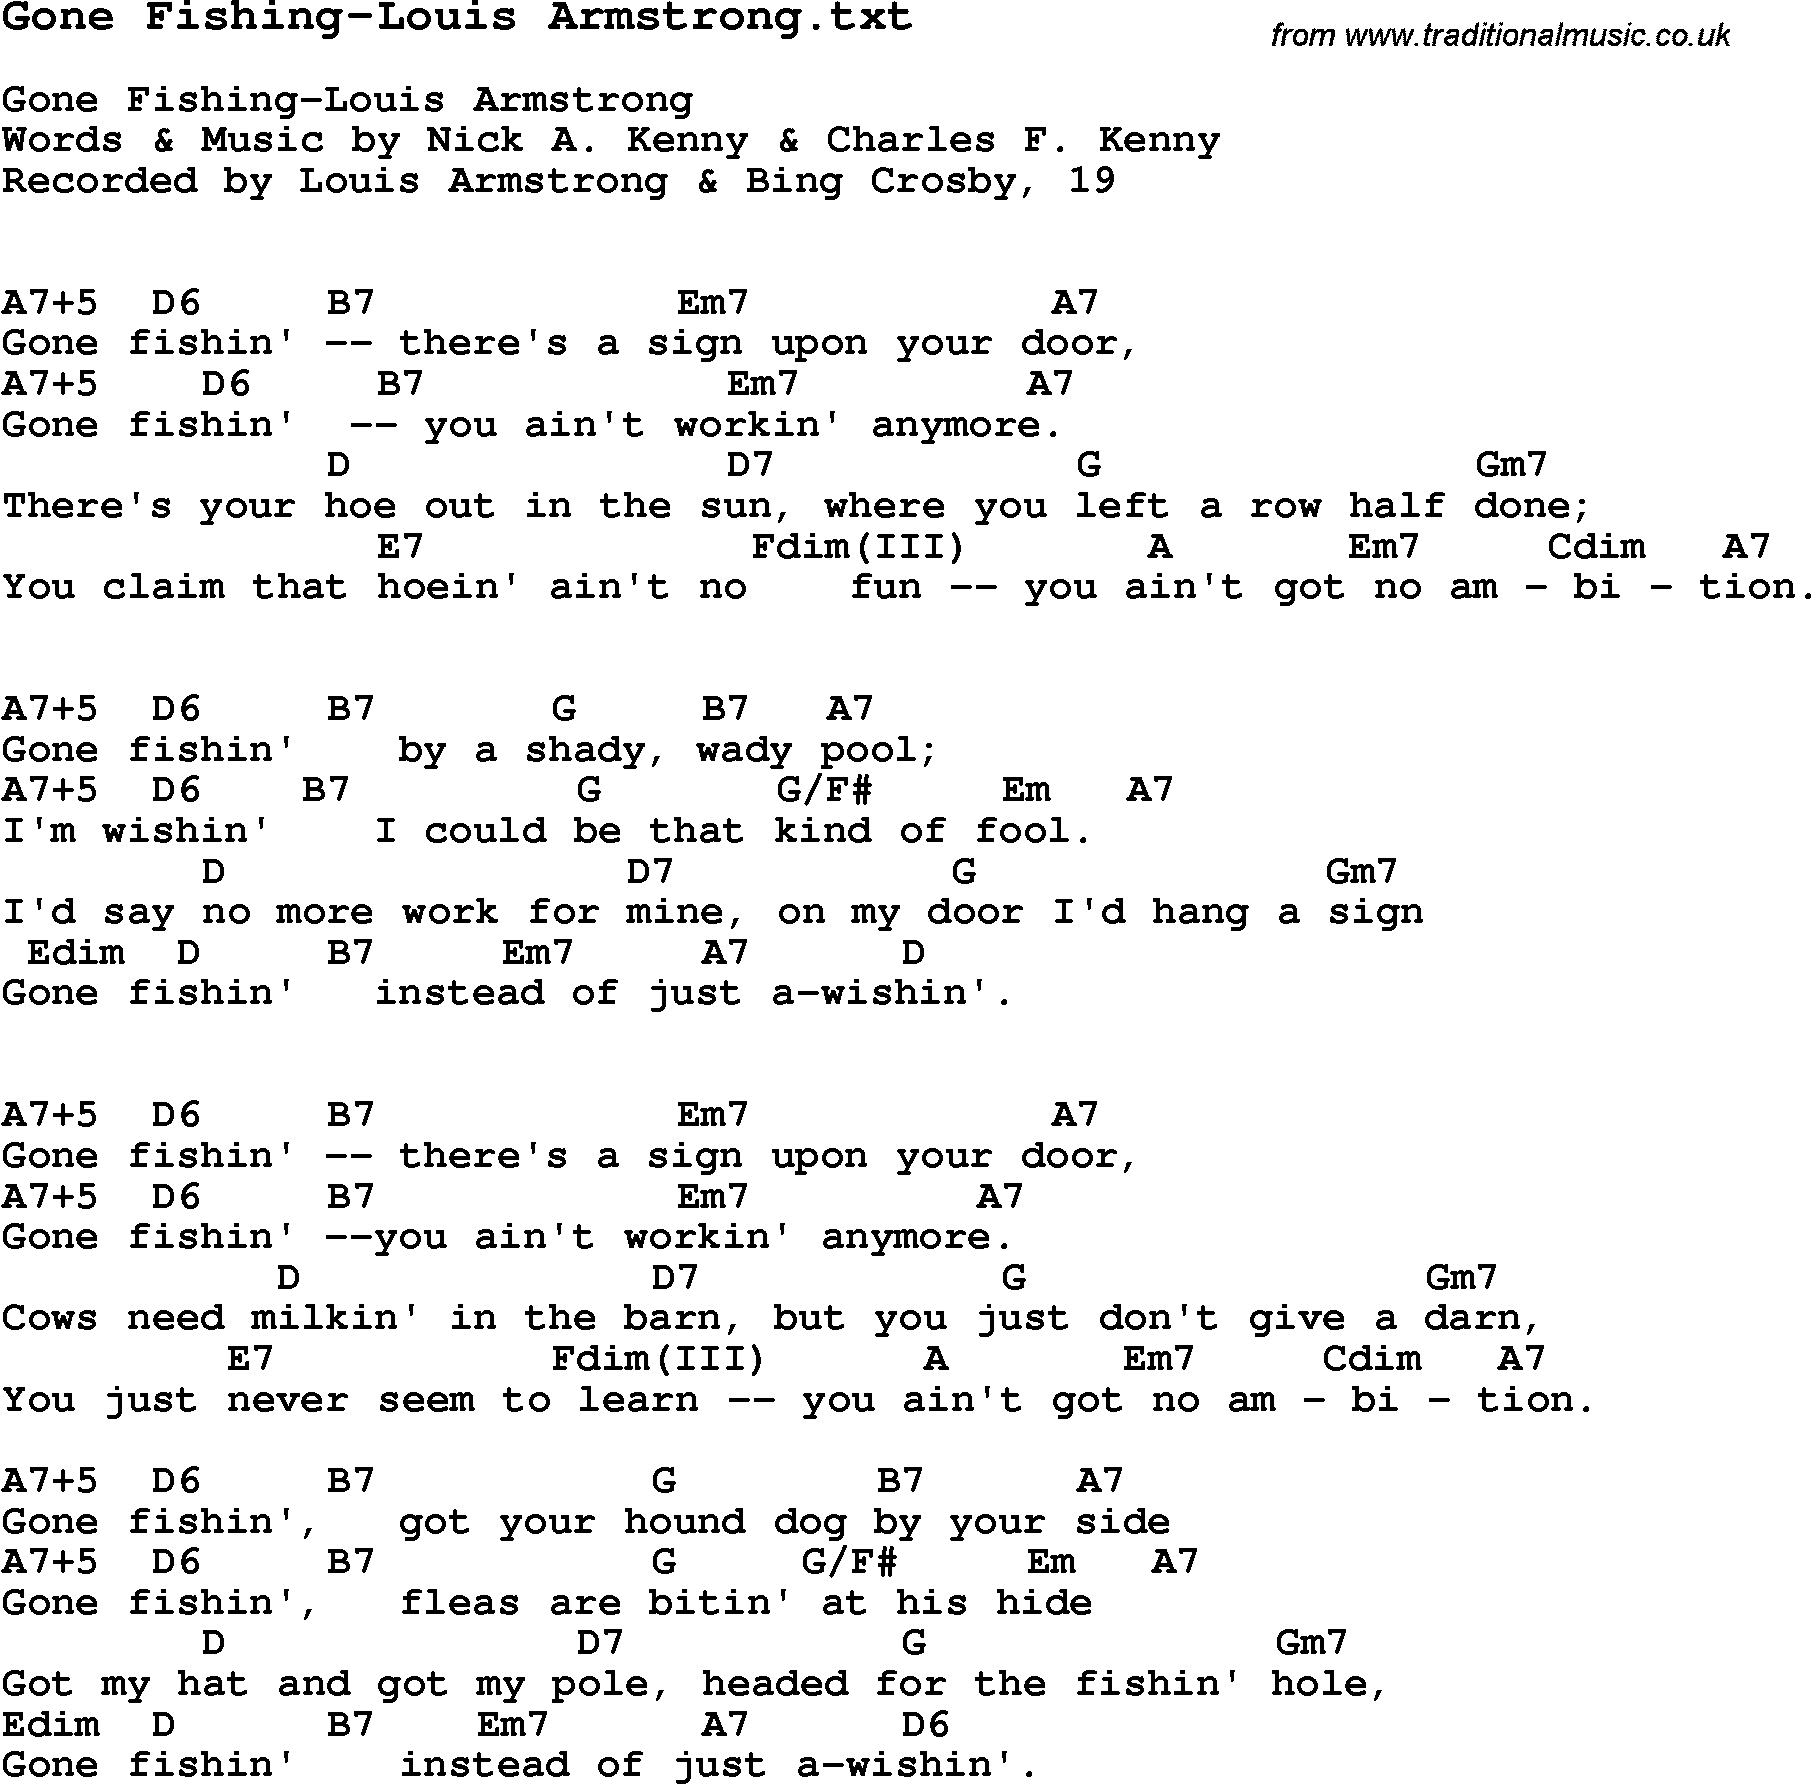 Jazz Song - Gone Fishing-Louis Armstrong with Chords, Tabs and Lyrics from top bands and artists